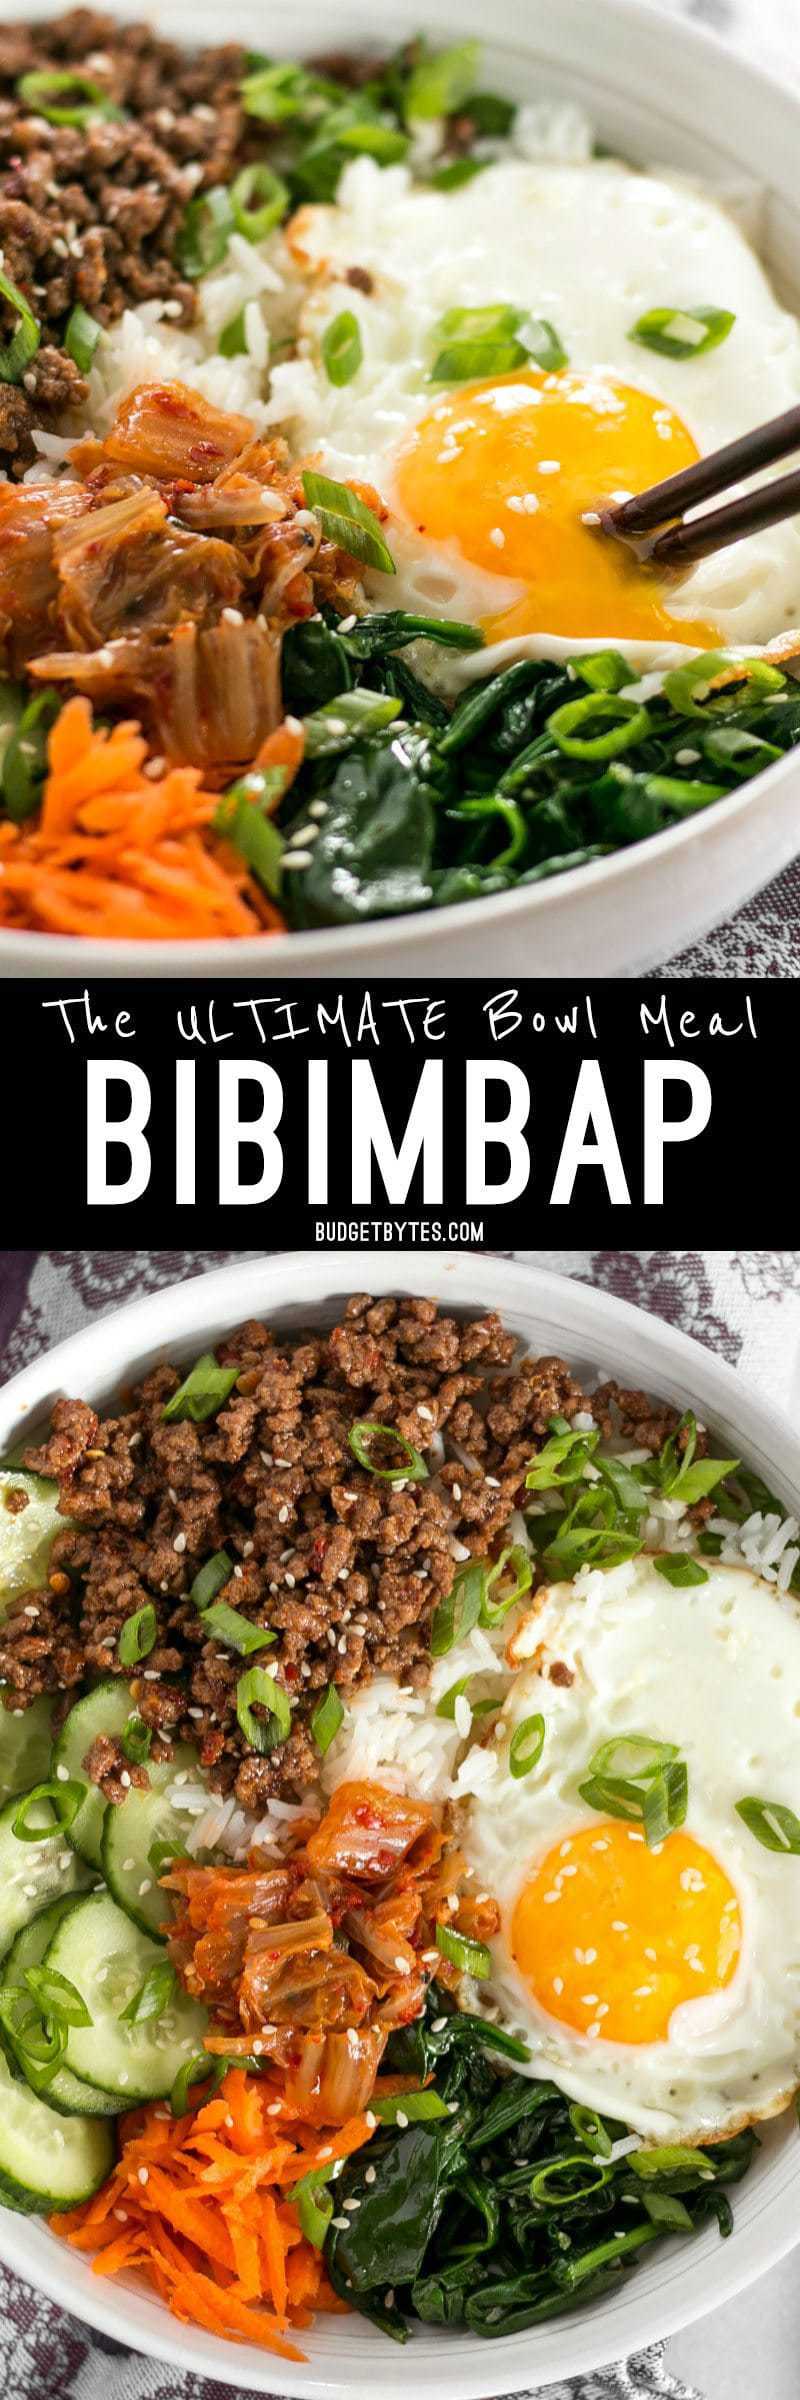 Bibimbap is the ultimate bowl meal with plenty of color, flavor, and texture to keep your taste buds happy and your stomach full. BudgetBytes.com